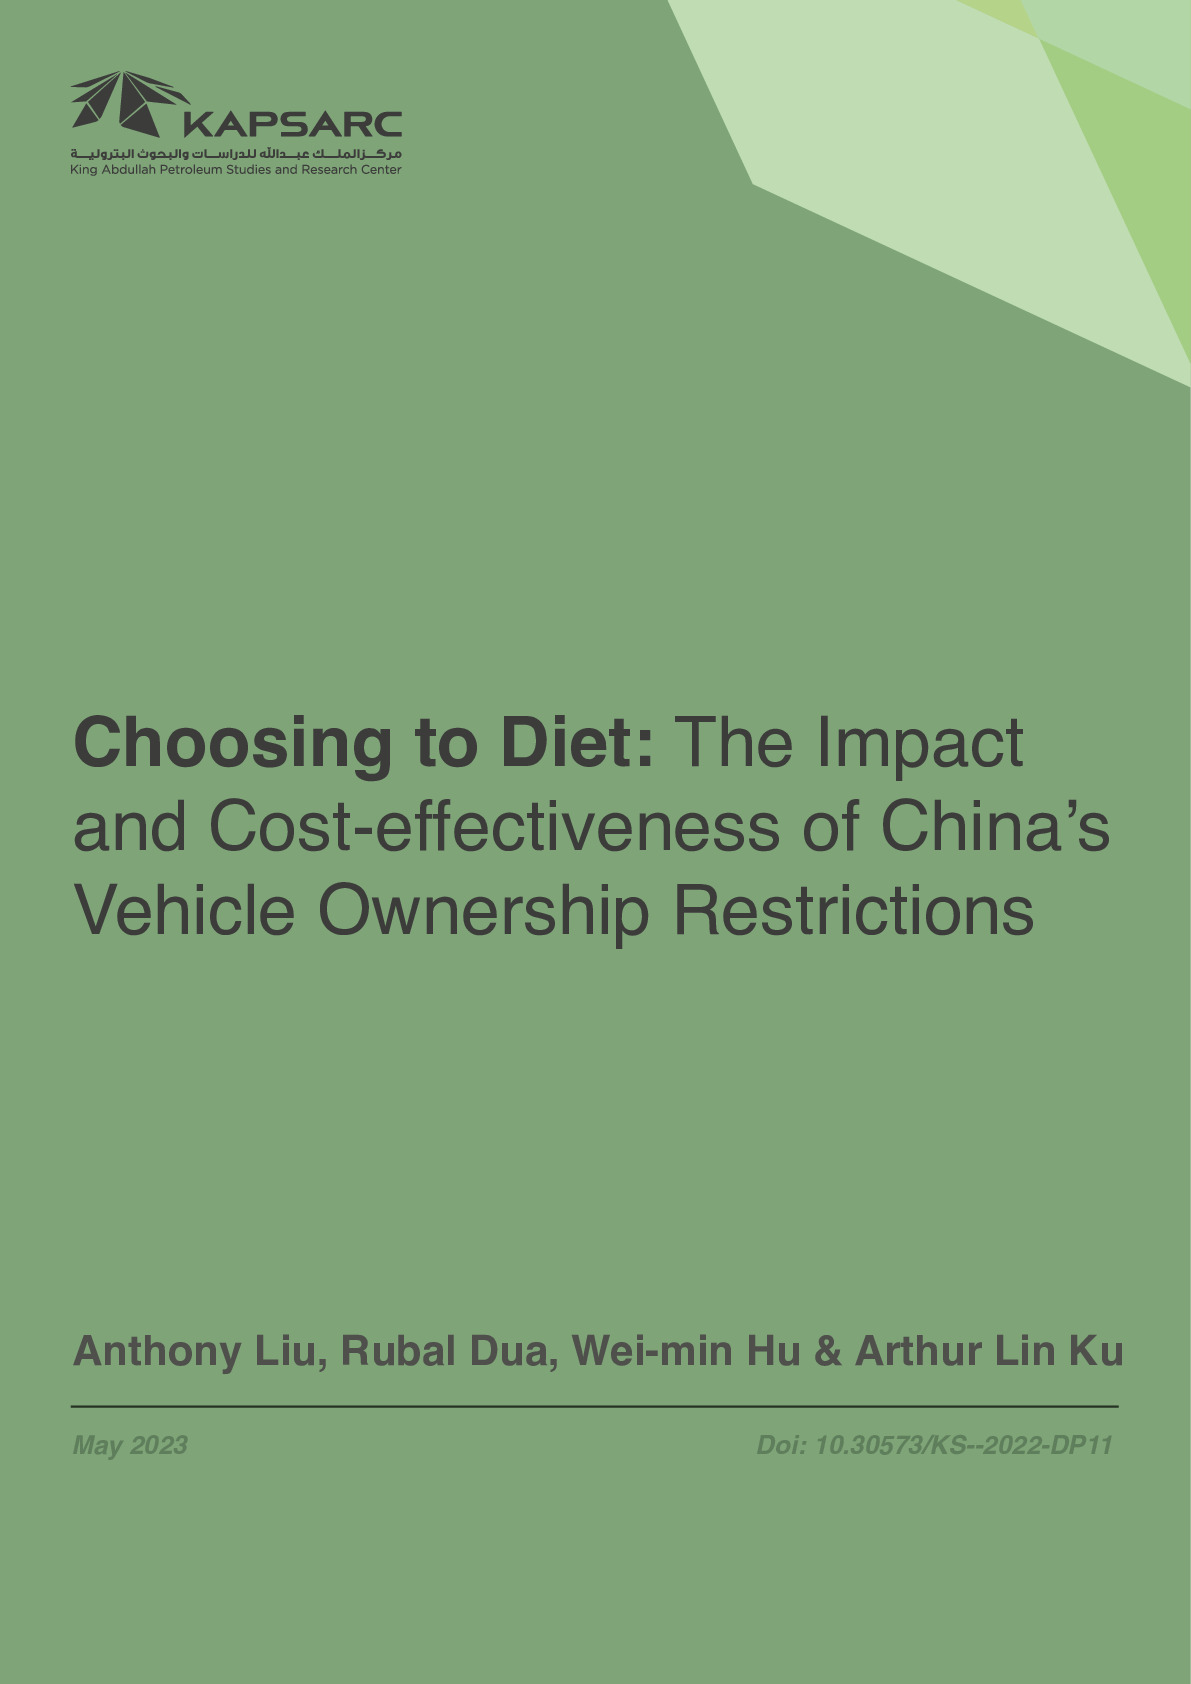 Choosing to Diet: The Impact and Cost-effectiveness of China’s Vehicle Ownership Restrictions